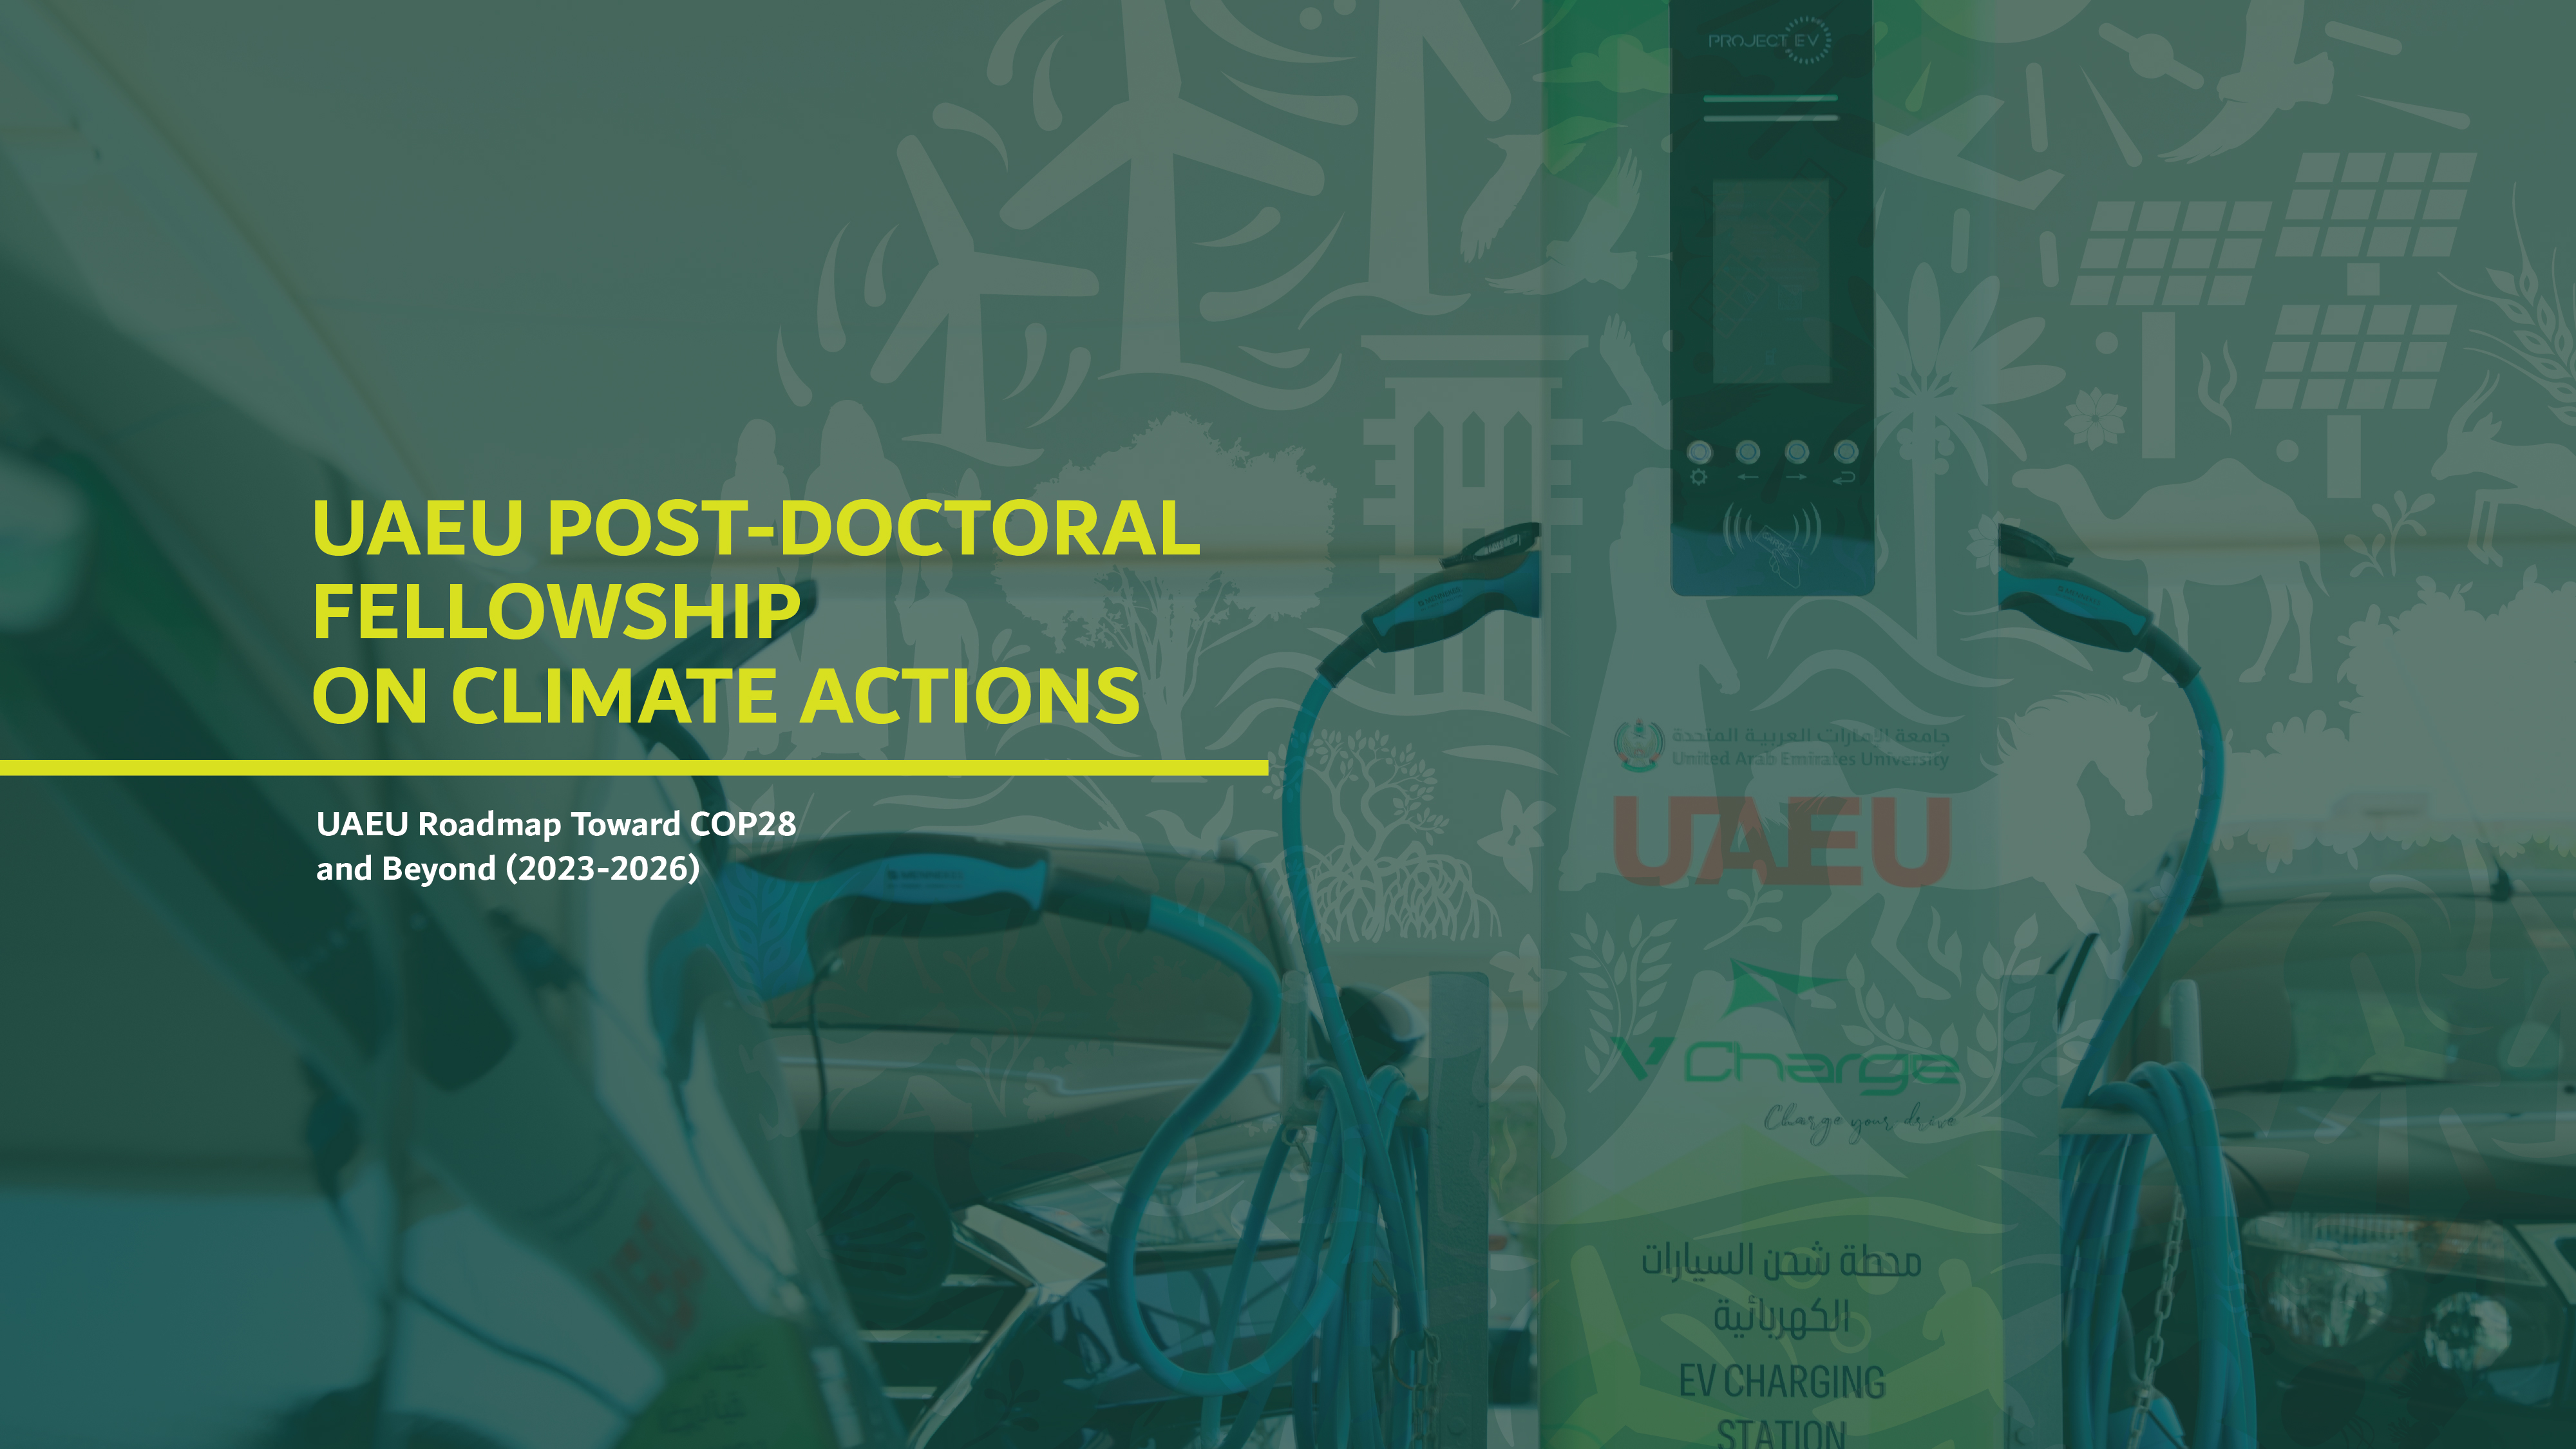 UAEU Post-Doctoral Fellowship on Climate Actions